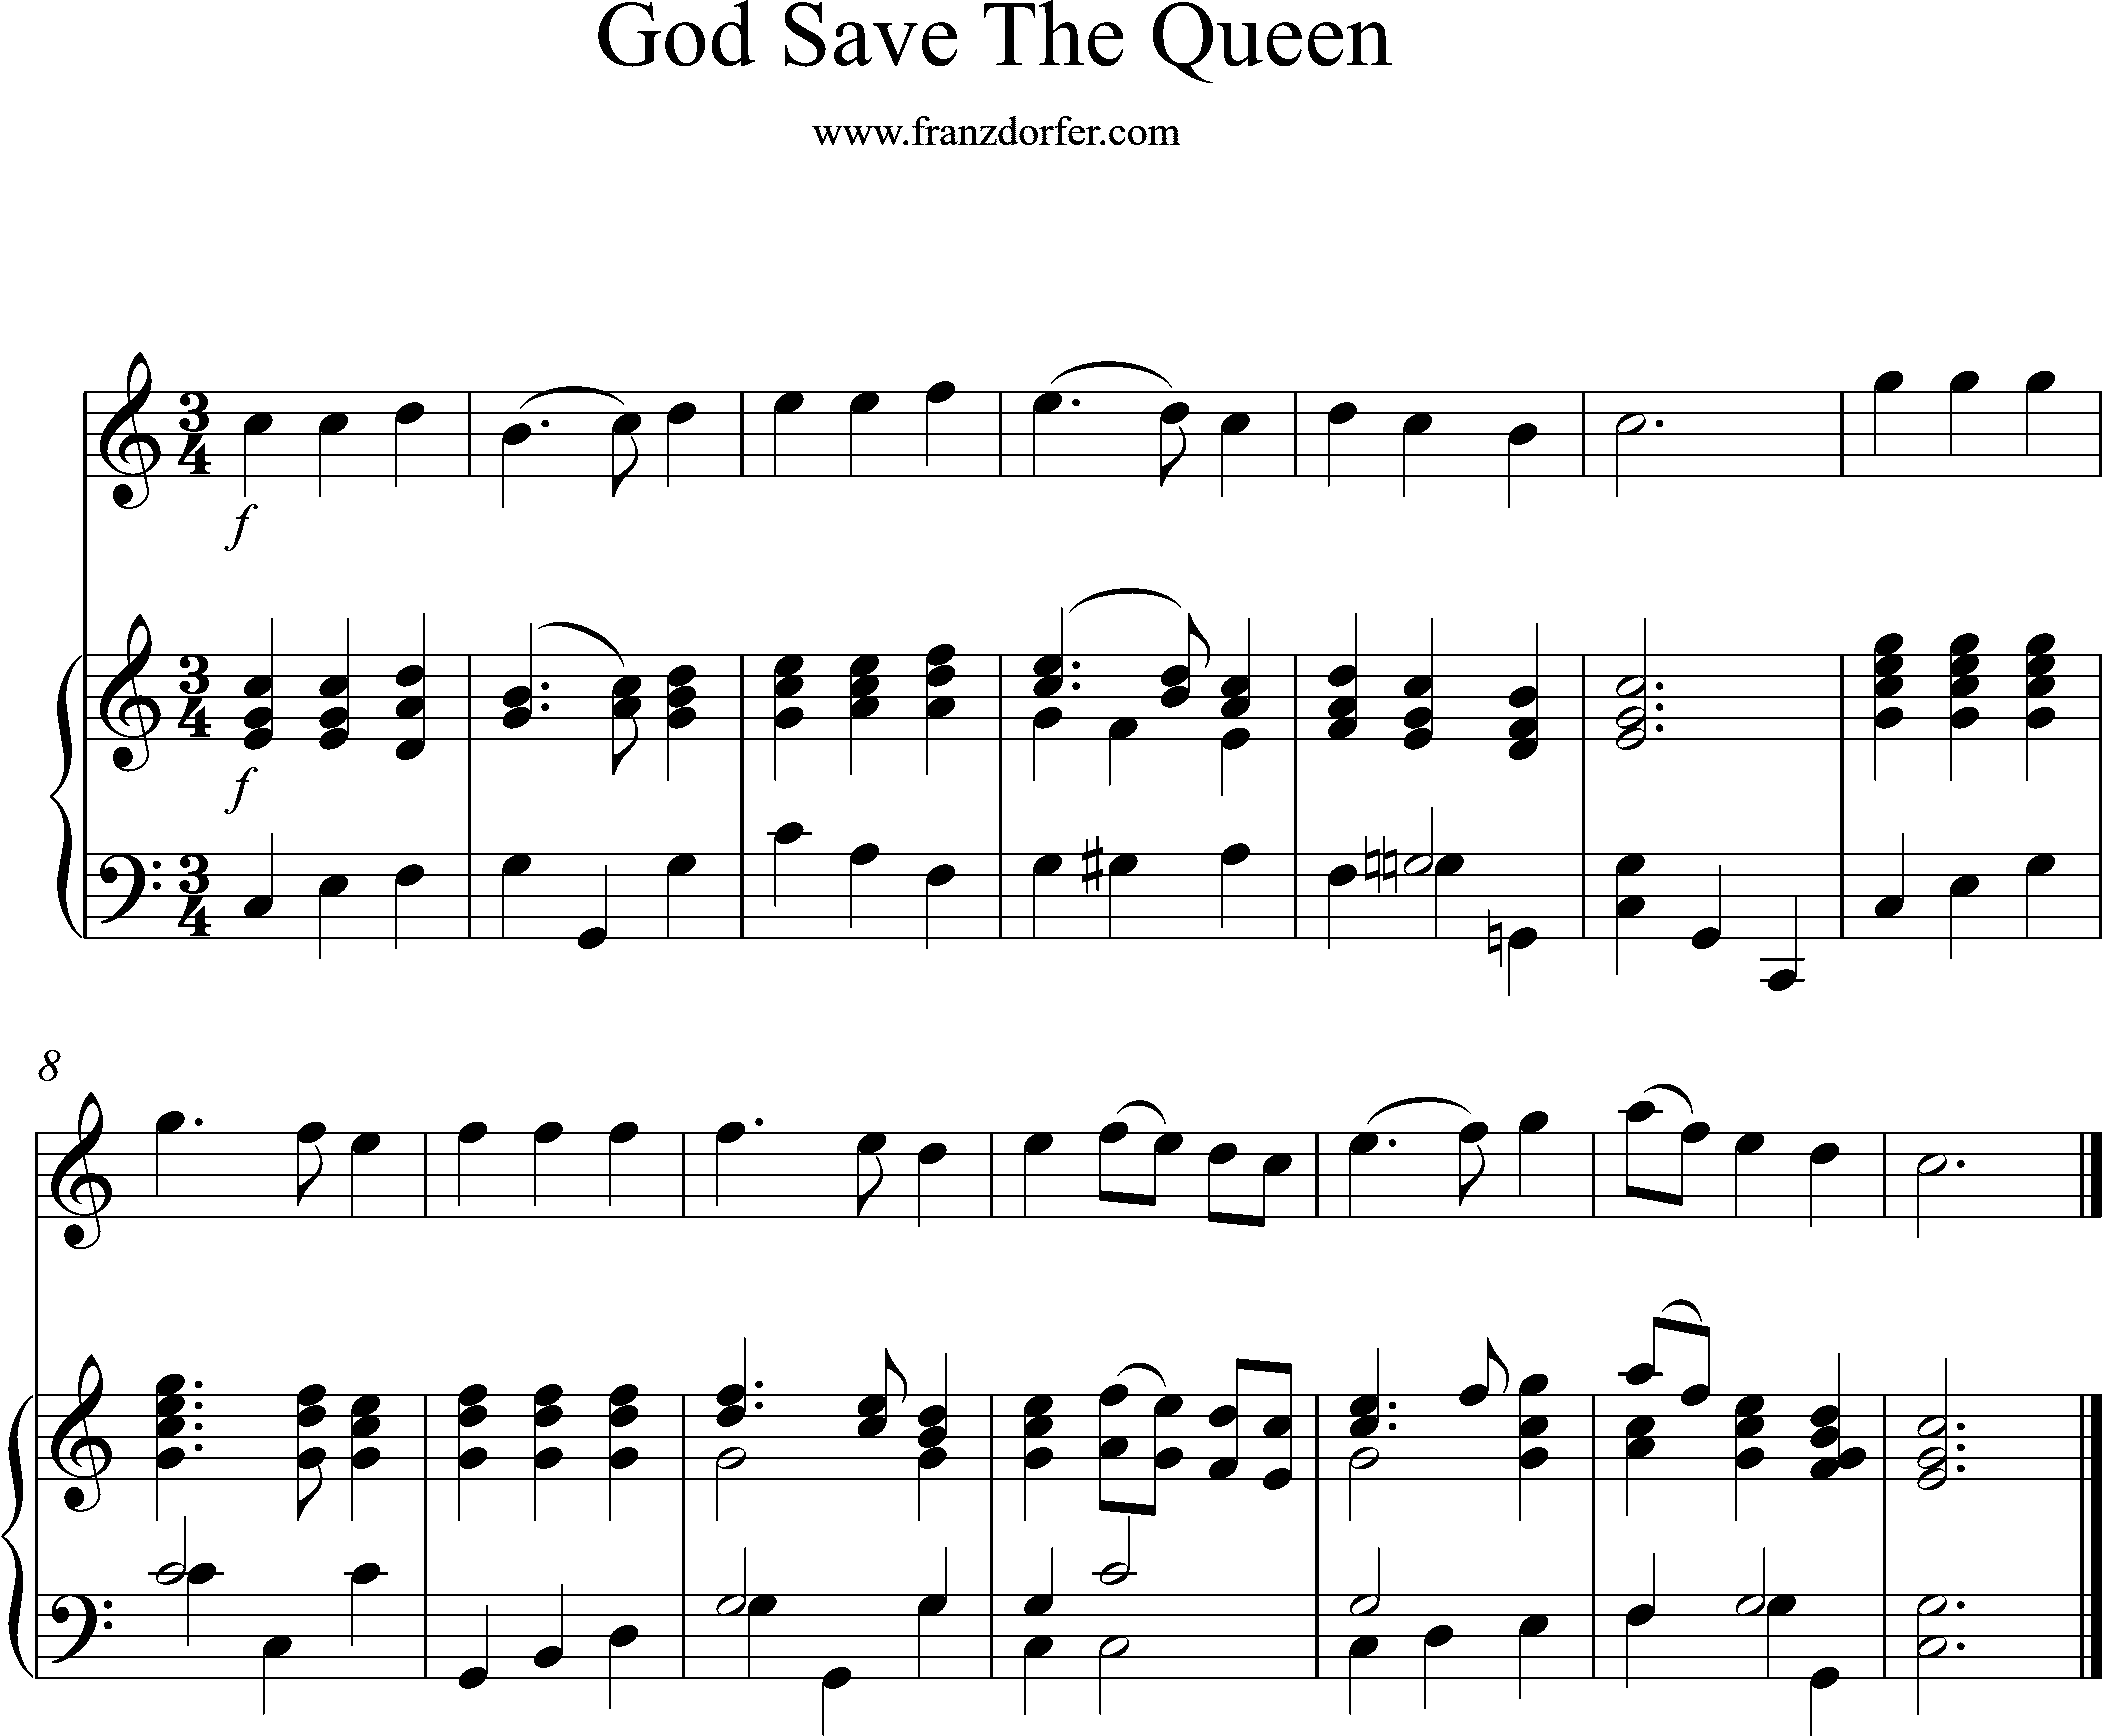 Piano partitur, G-Major, God save the Queen